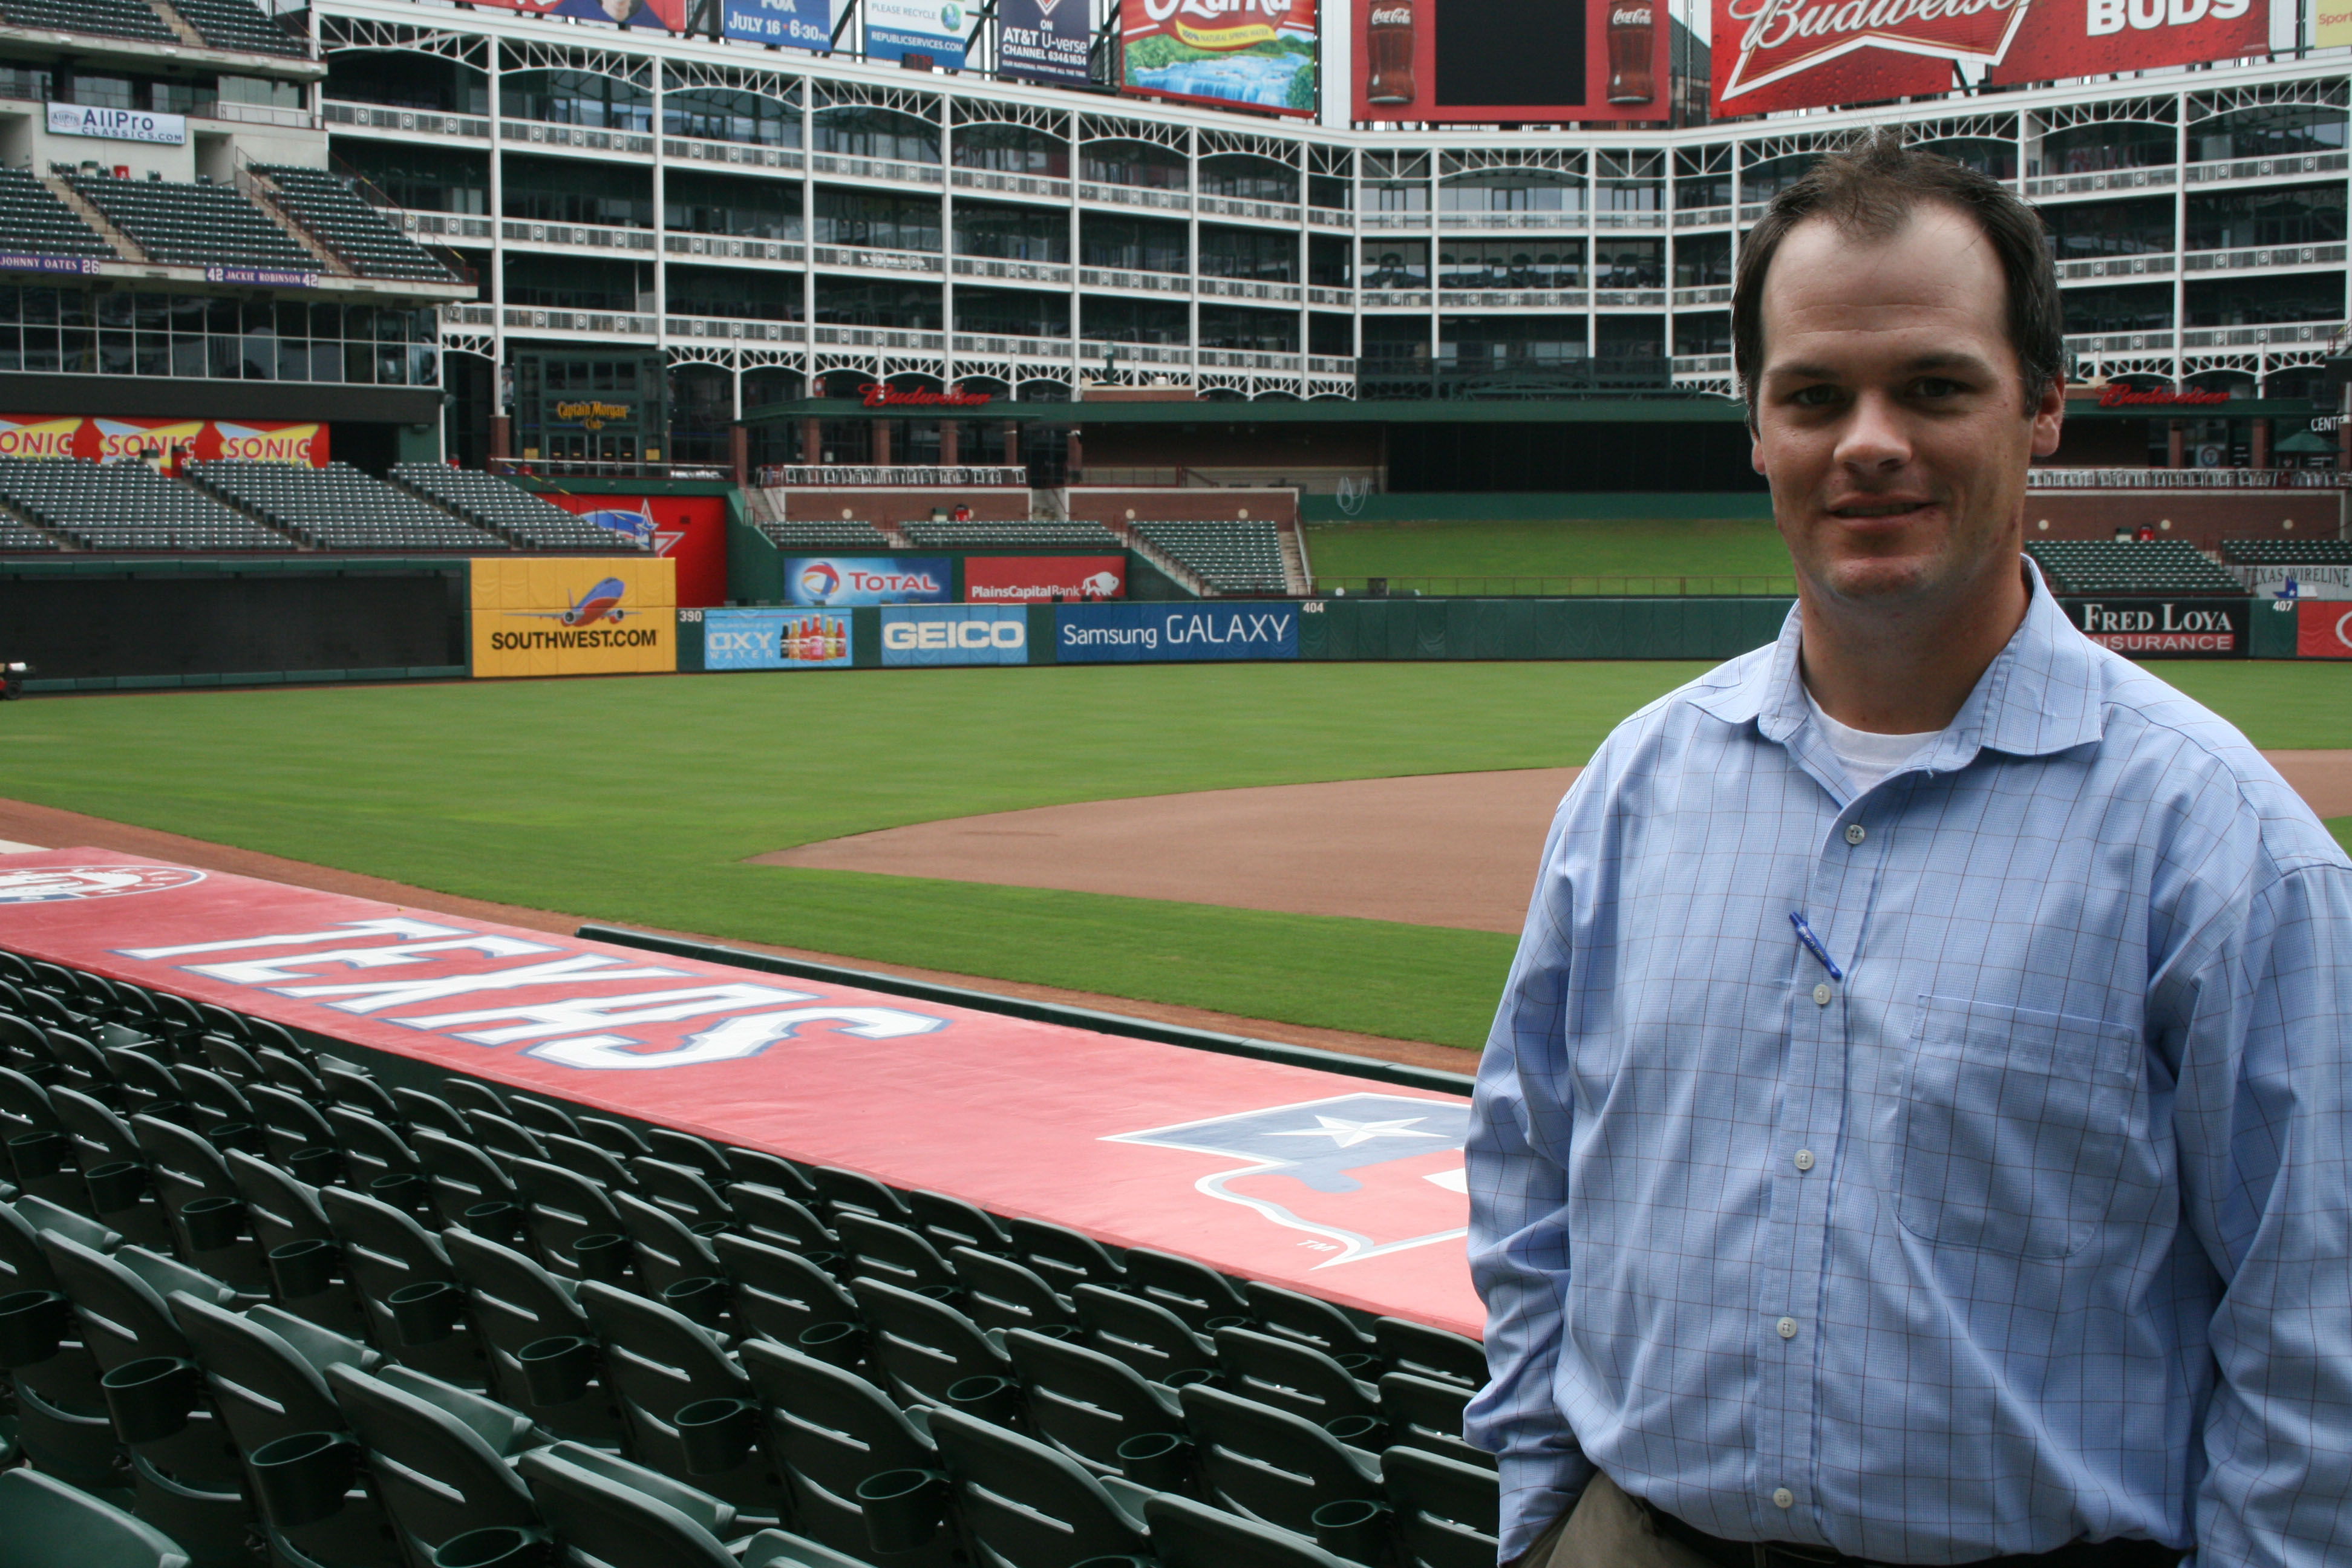 Texas Rangers Archives - Sportscasting